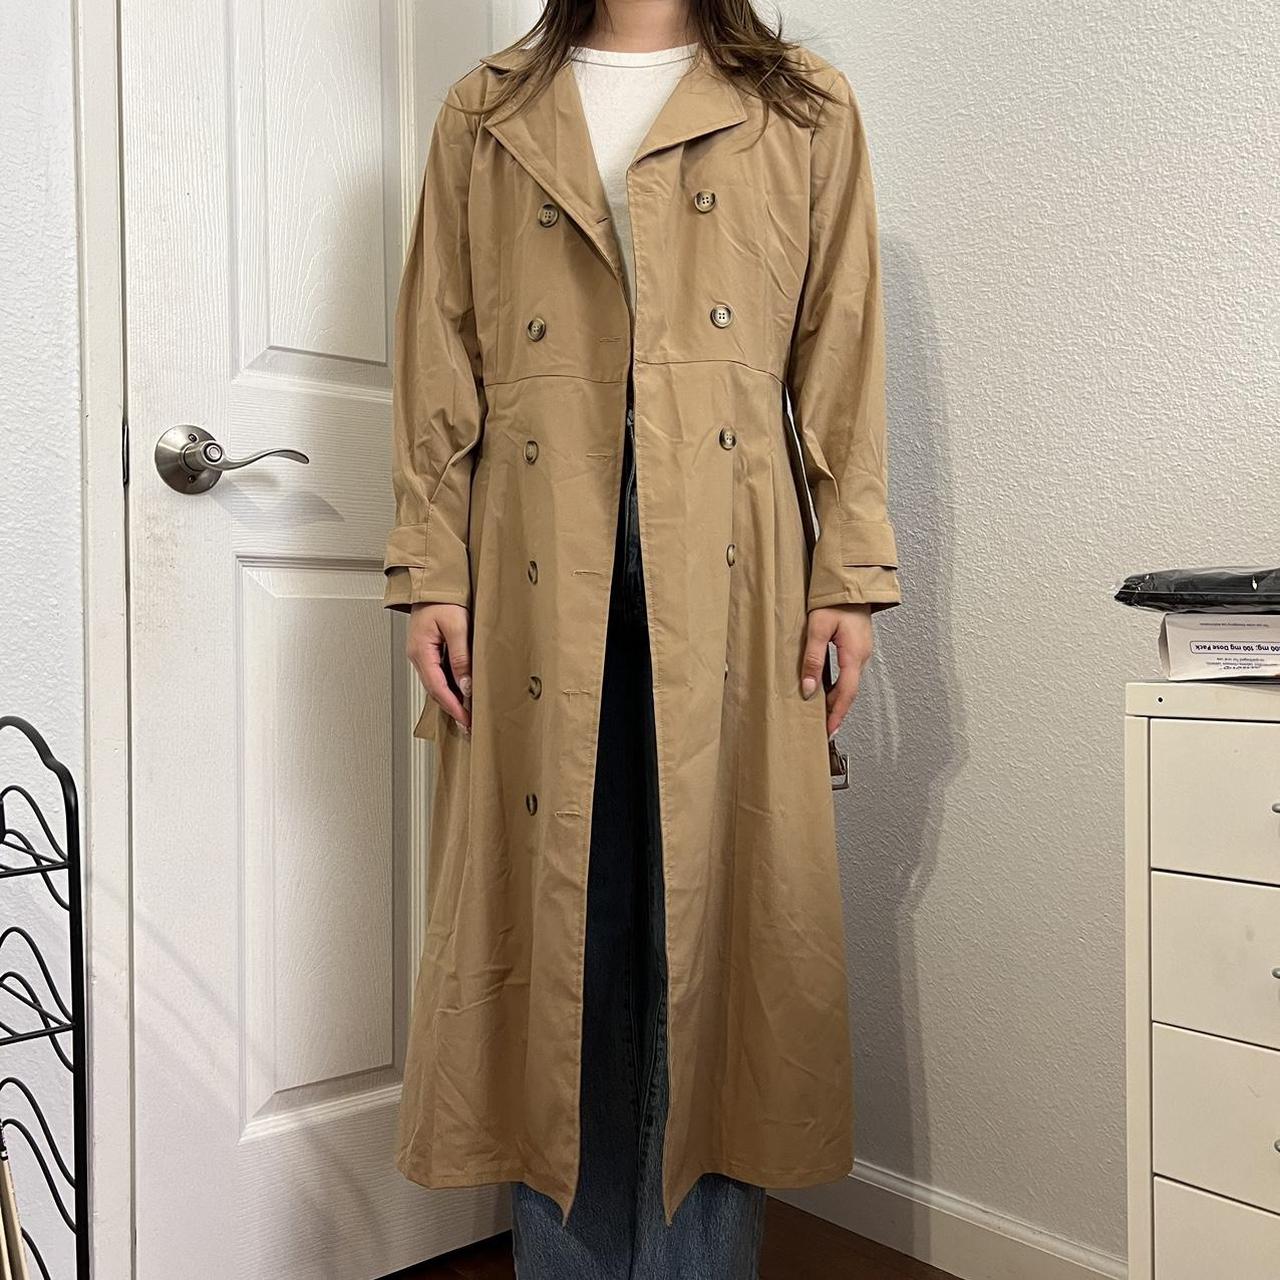 tan light weight trench coat. perfect for layering.... - Depop